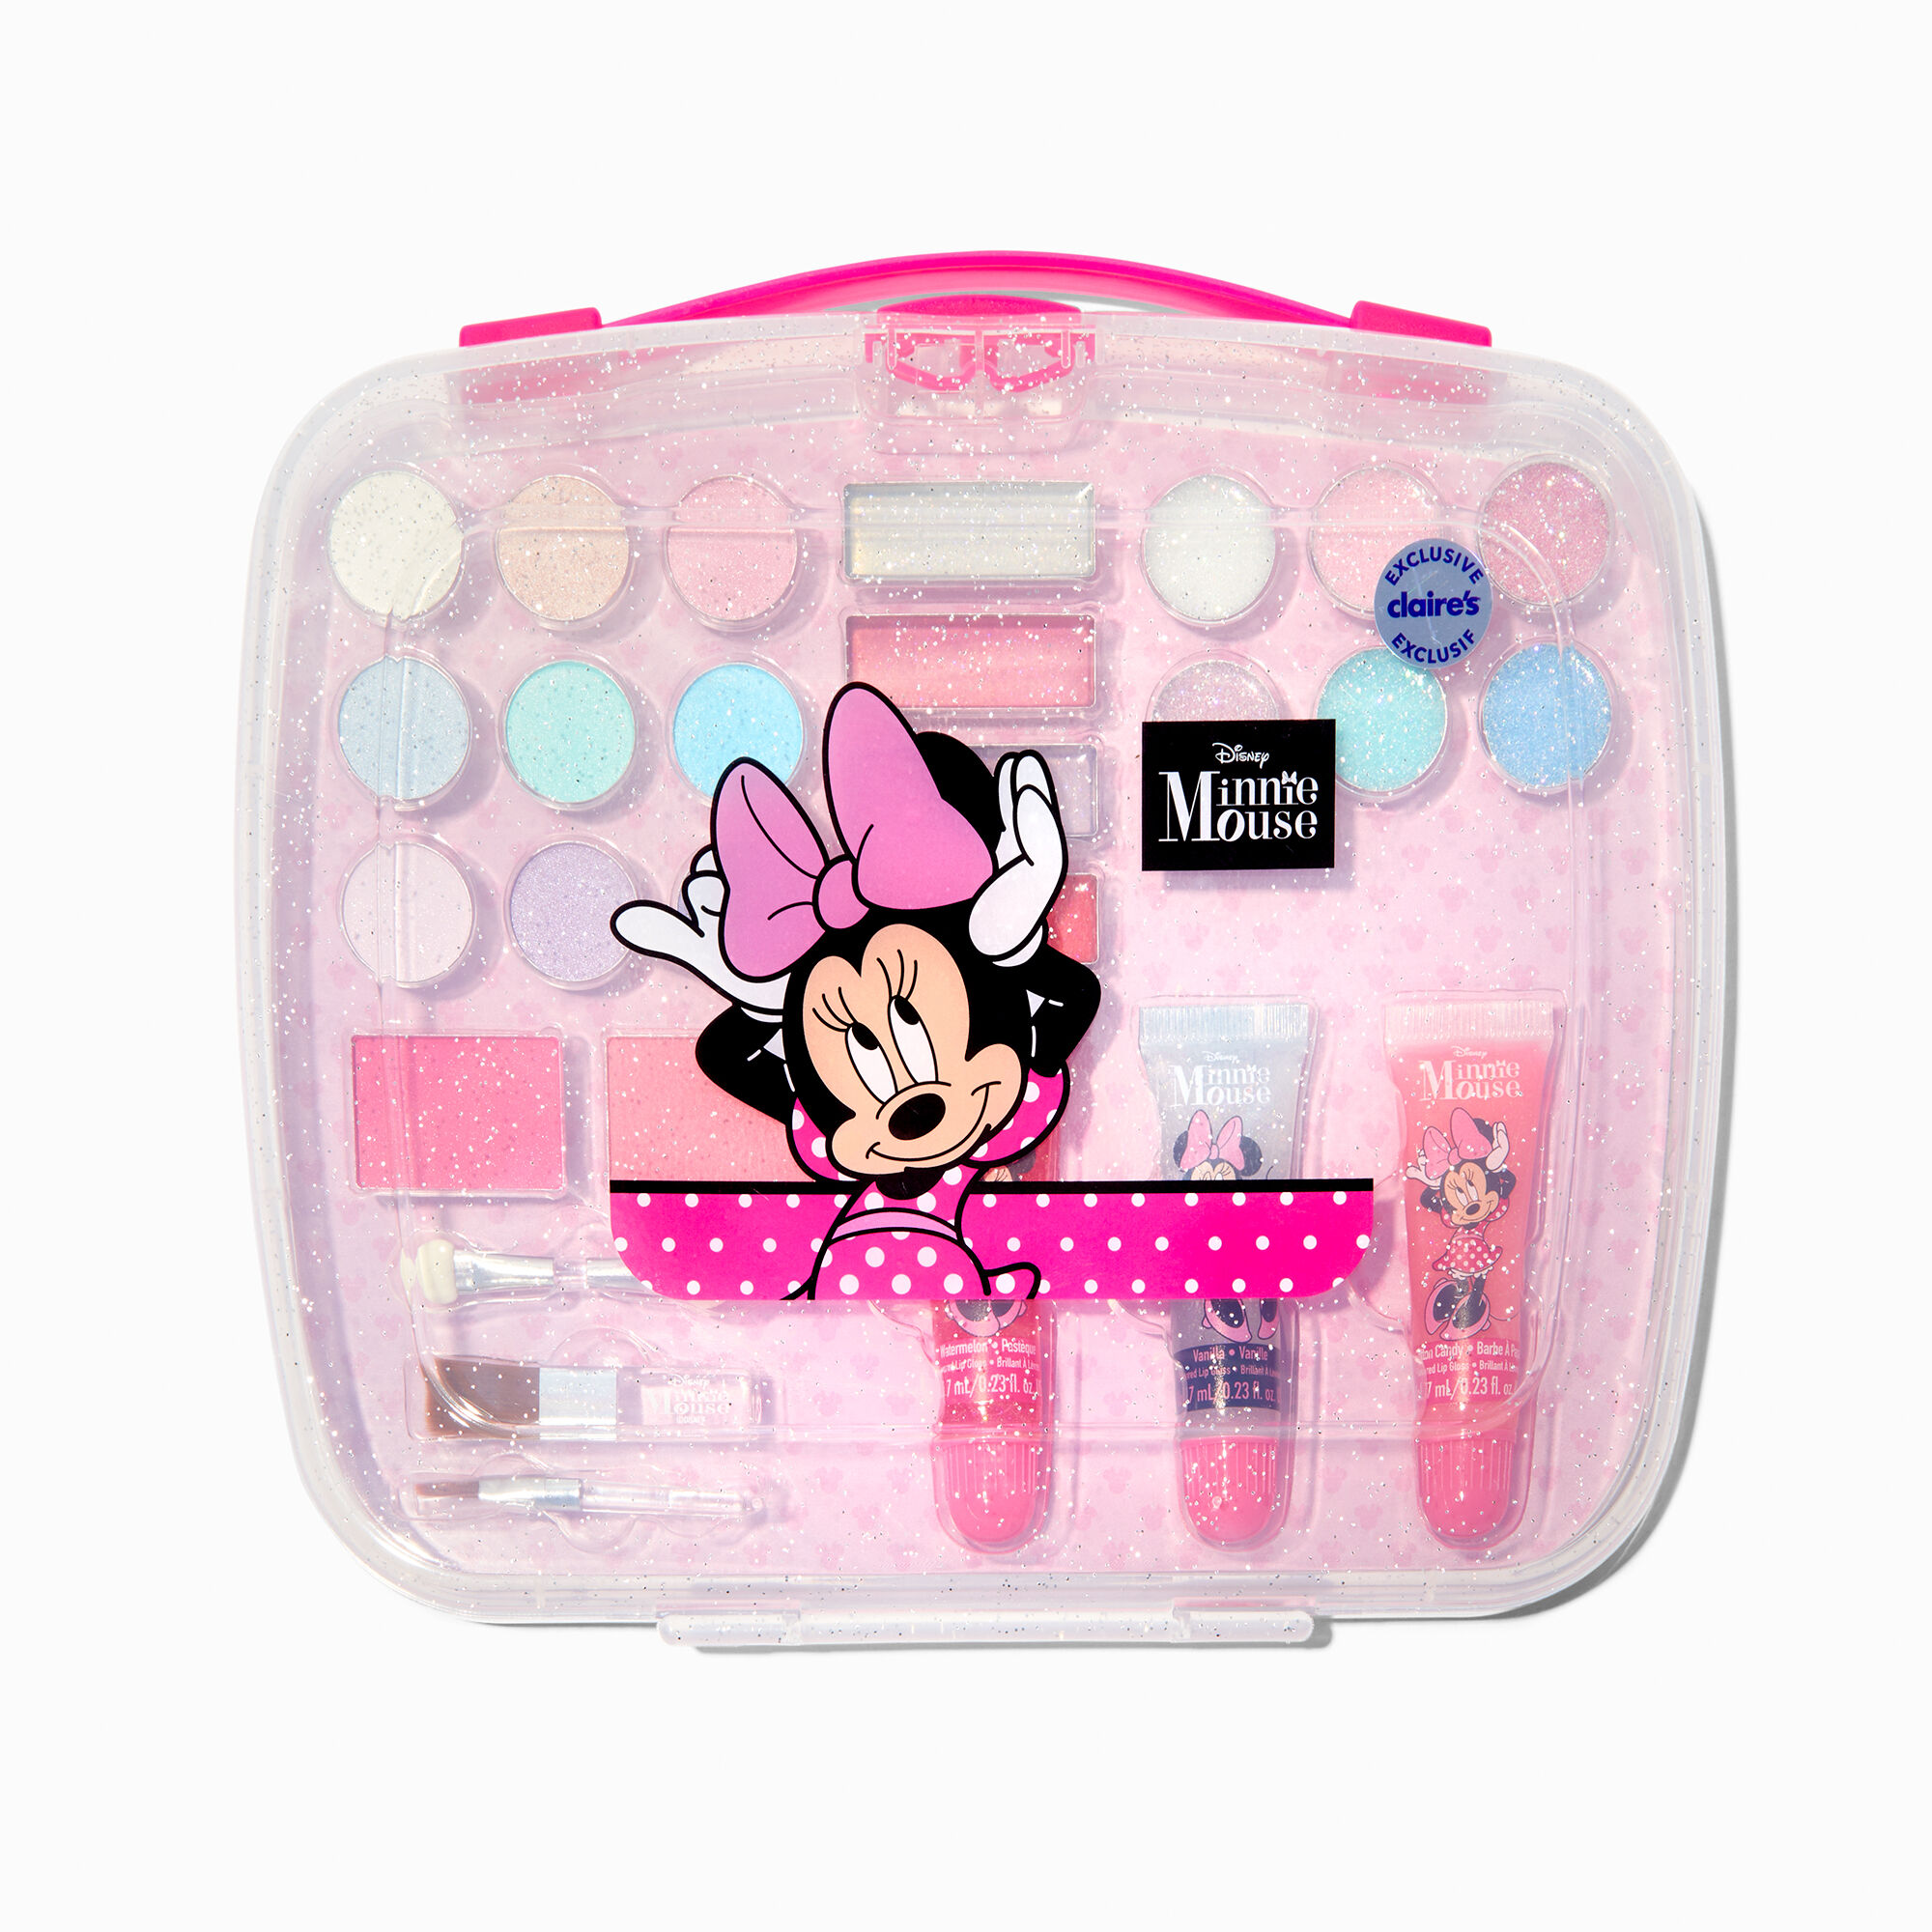 View Claires Disney Minnie Mouse Cosmetic Set Case information